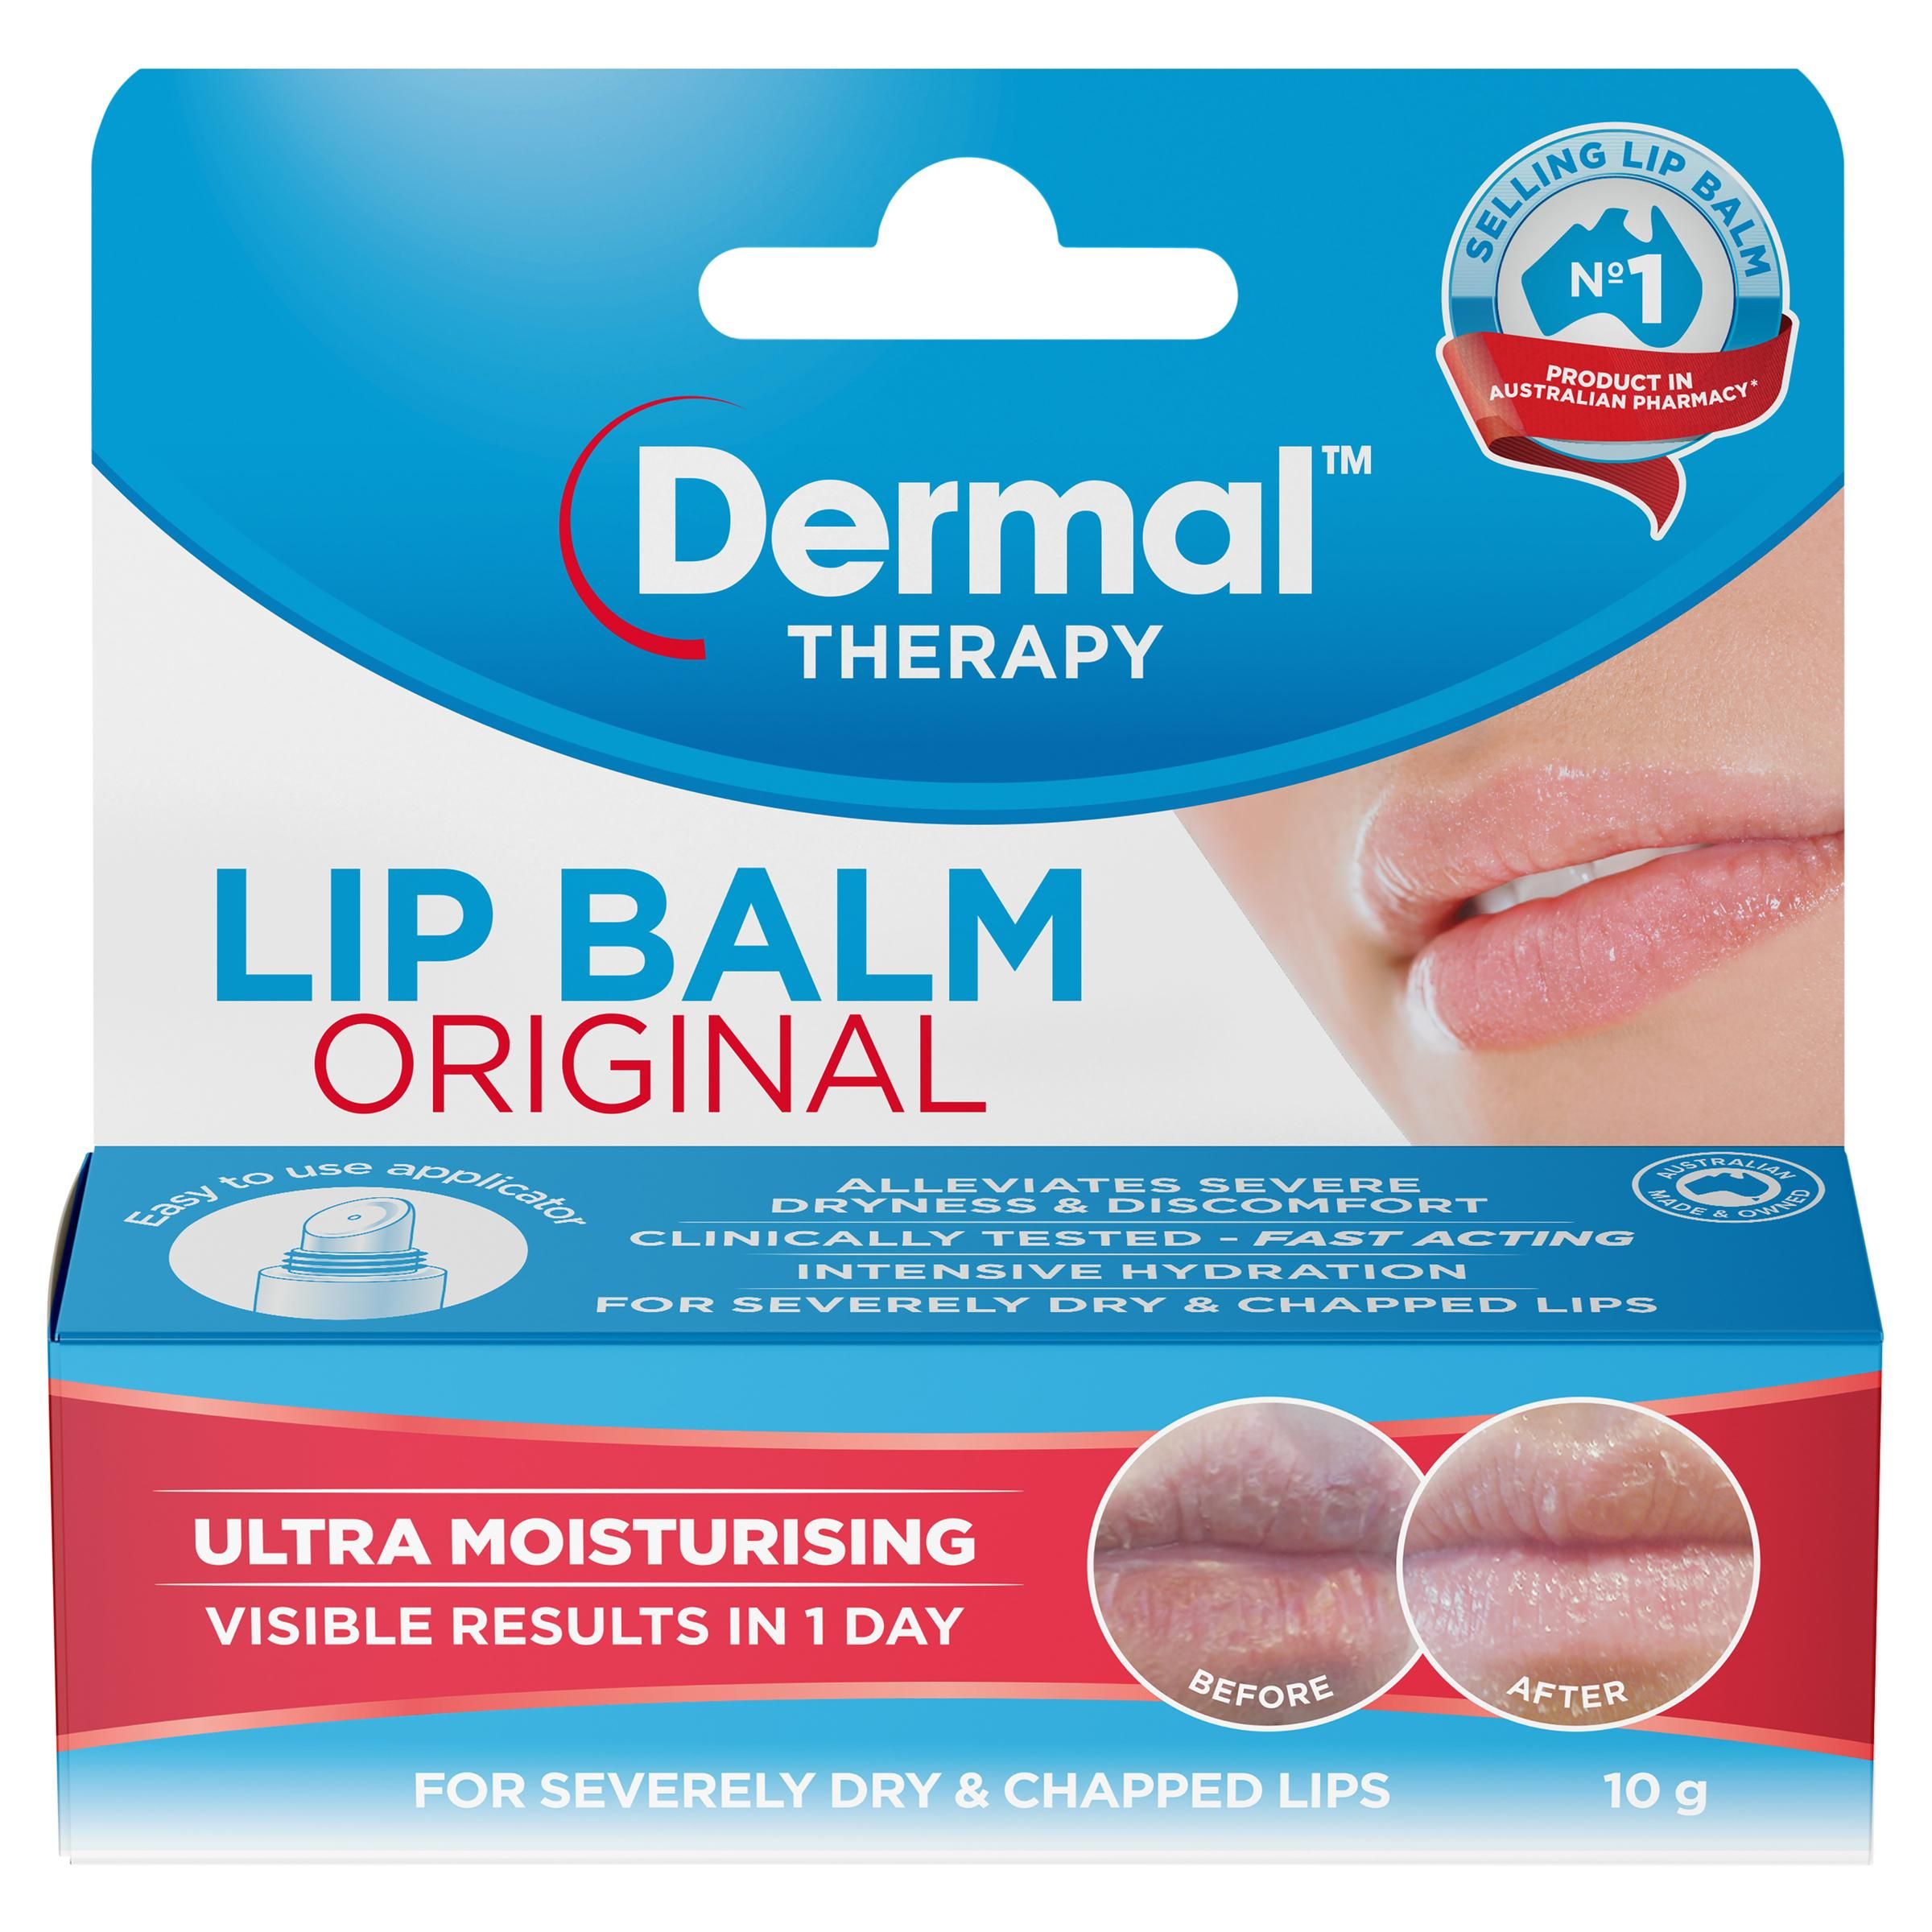 DERMAL THERAPY LIP BALM 10G - Direct Chemist Outlet